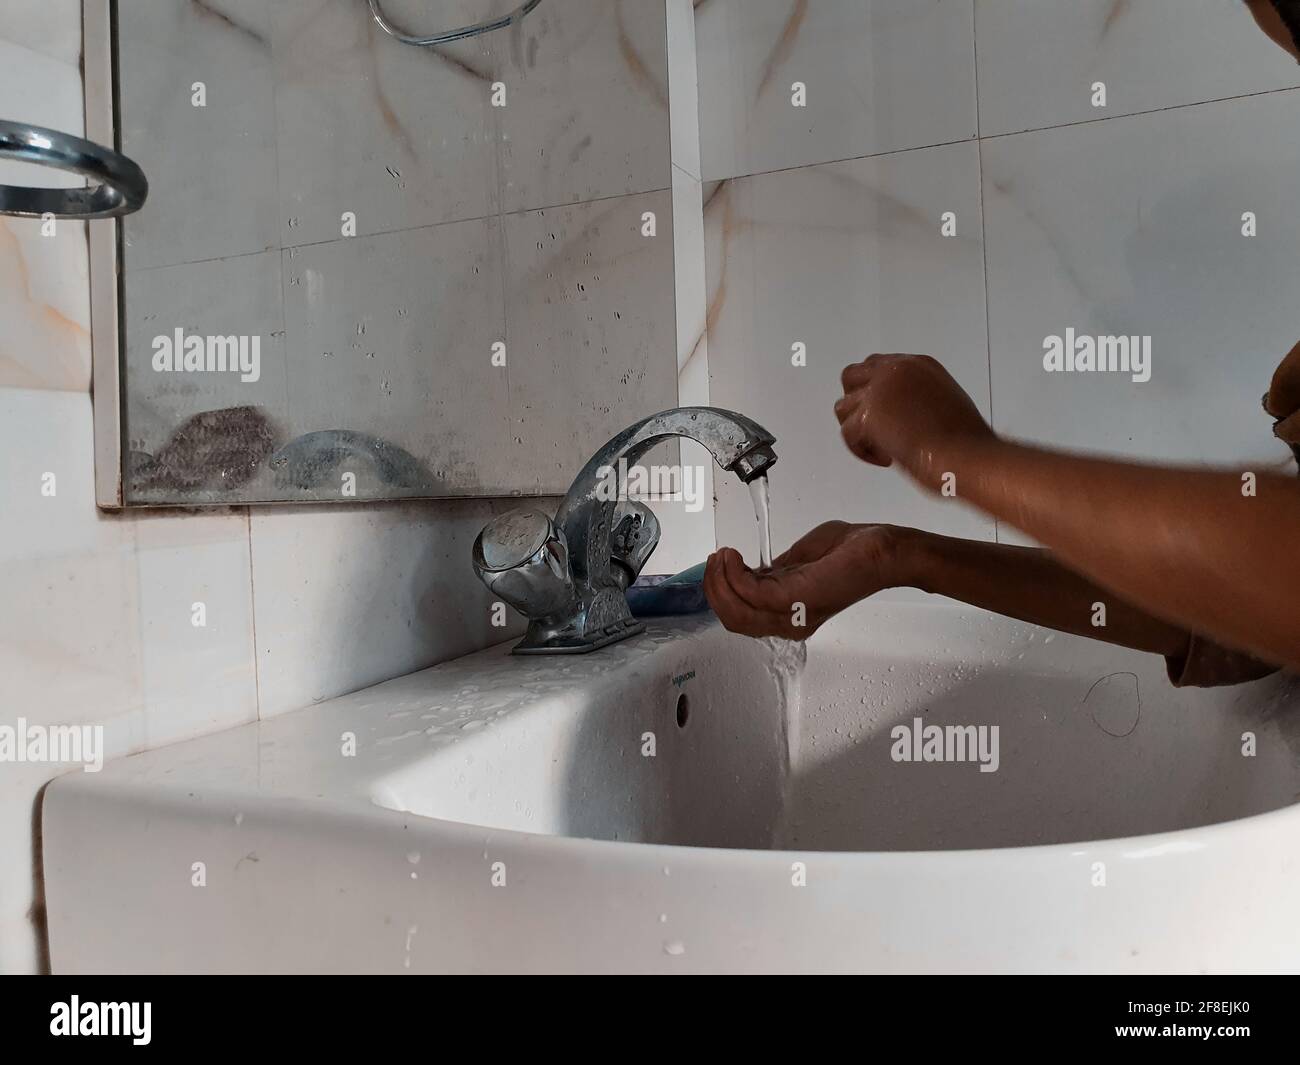 Masked Children washing hands during coronavirus pandemic. Hand wash mask wearing and using sanitiser are recommended by world health organisation. Stock Photo